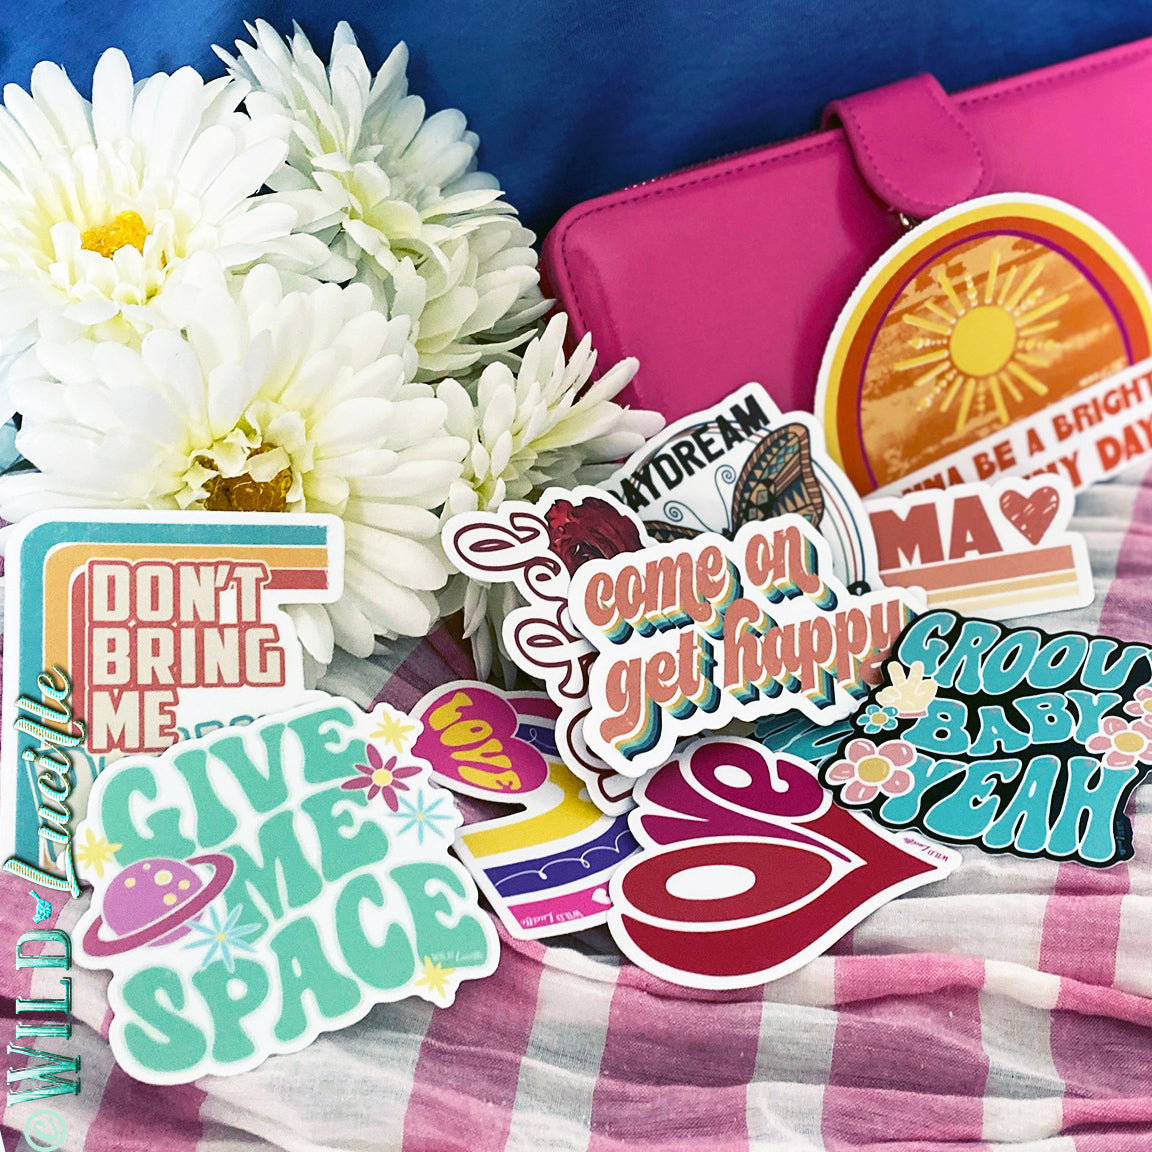 Shop all retro style vinyl decals from Decal Barn